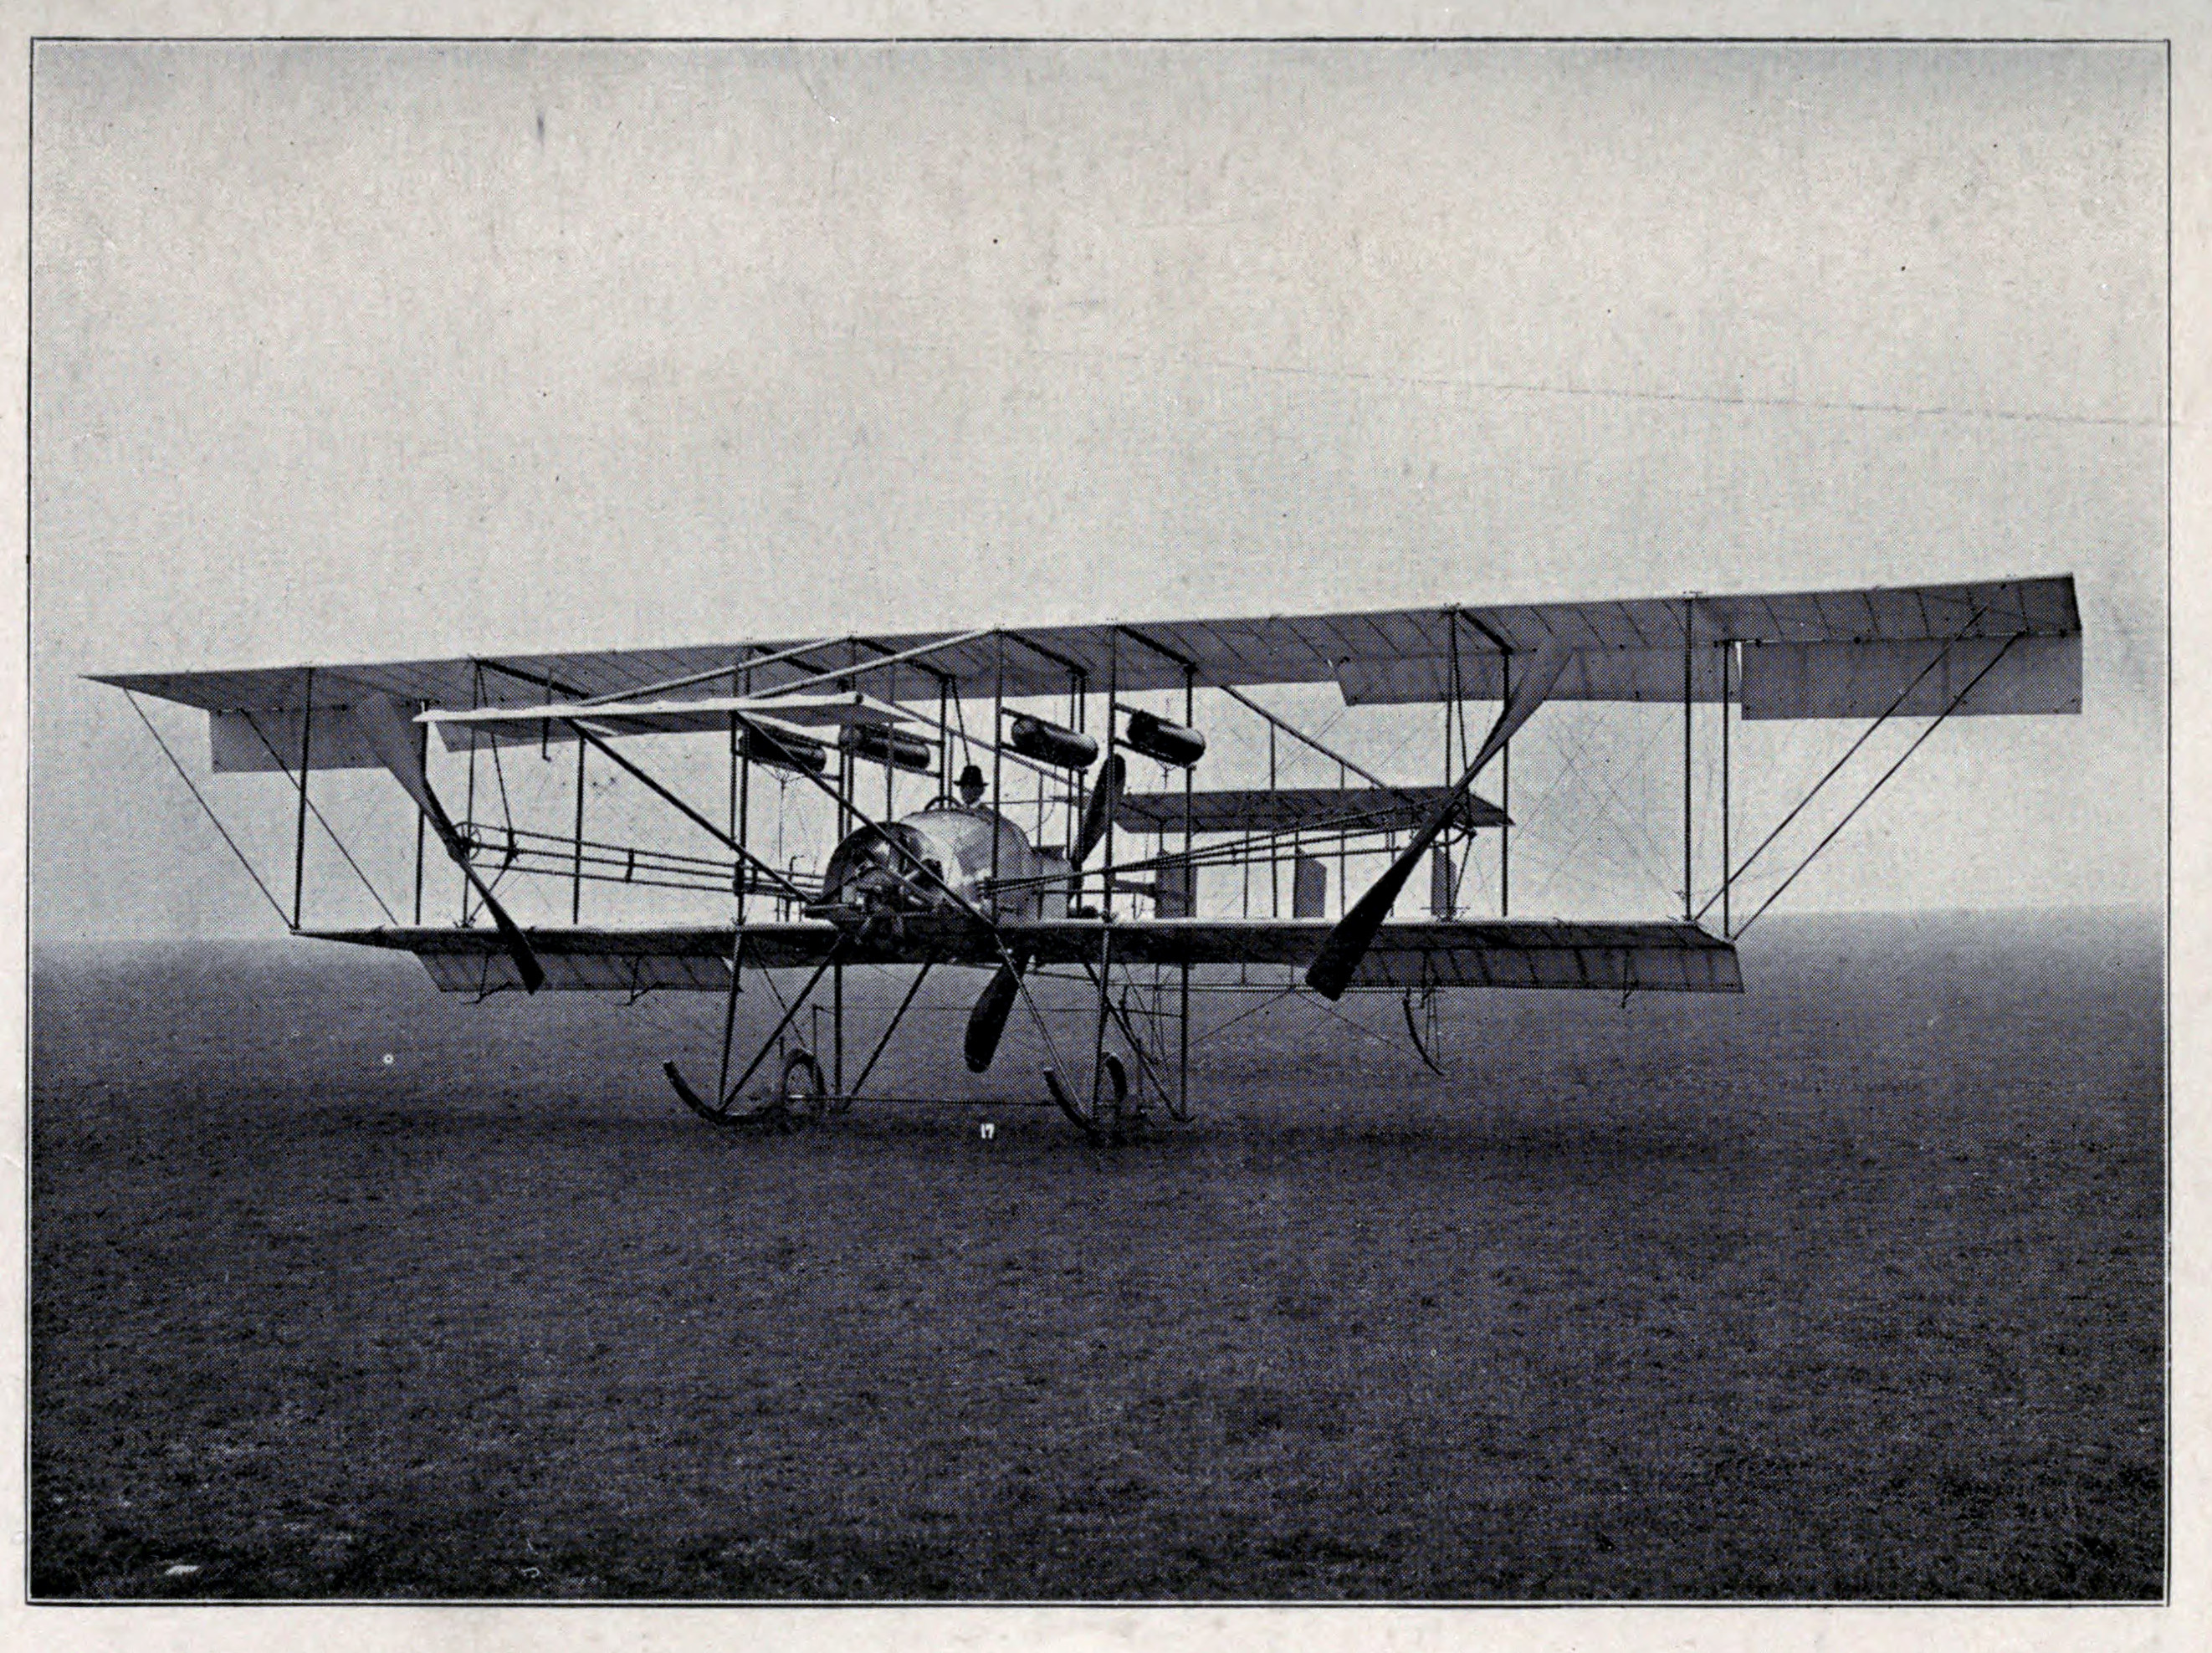 MILITARY BIPLANE WITH TWO ENGINES.